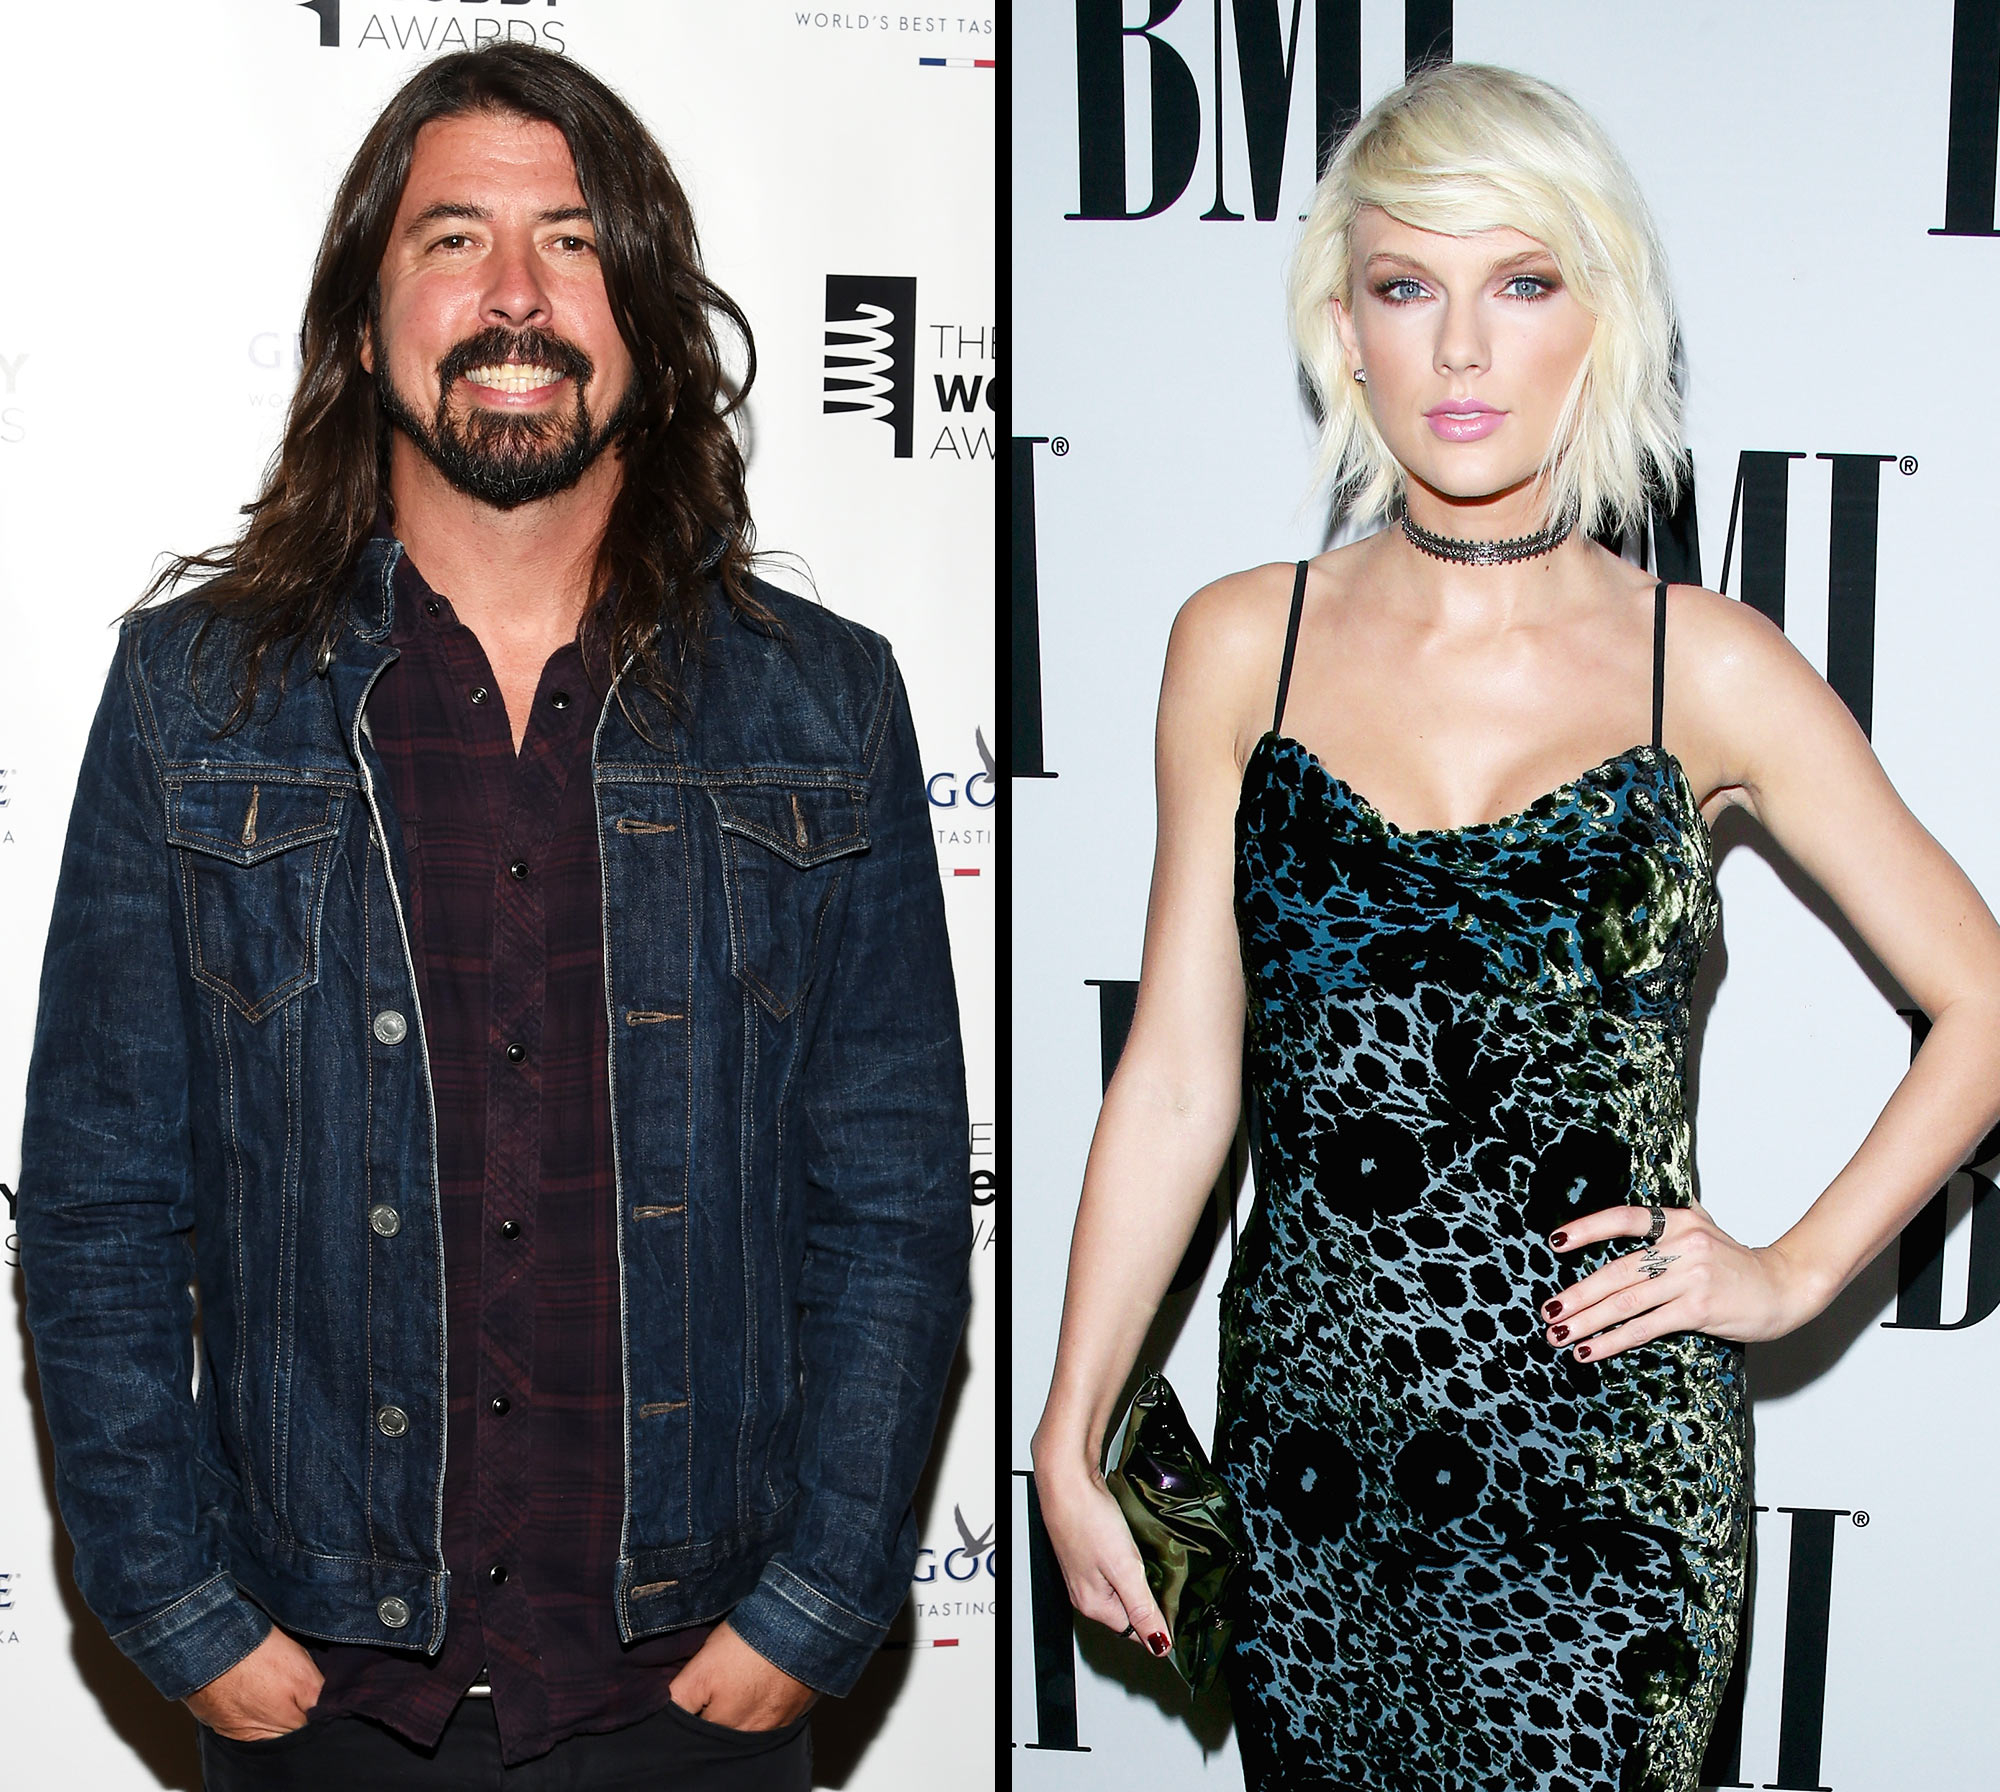 Dave Grohl Announces Foo Fighters Hiatus in Letter to Fans